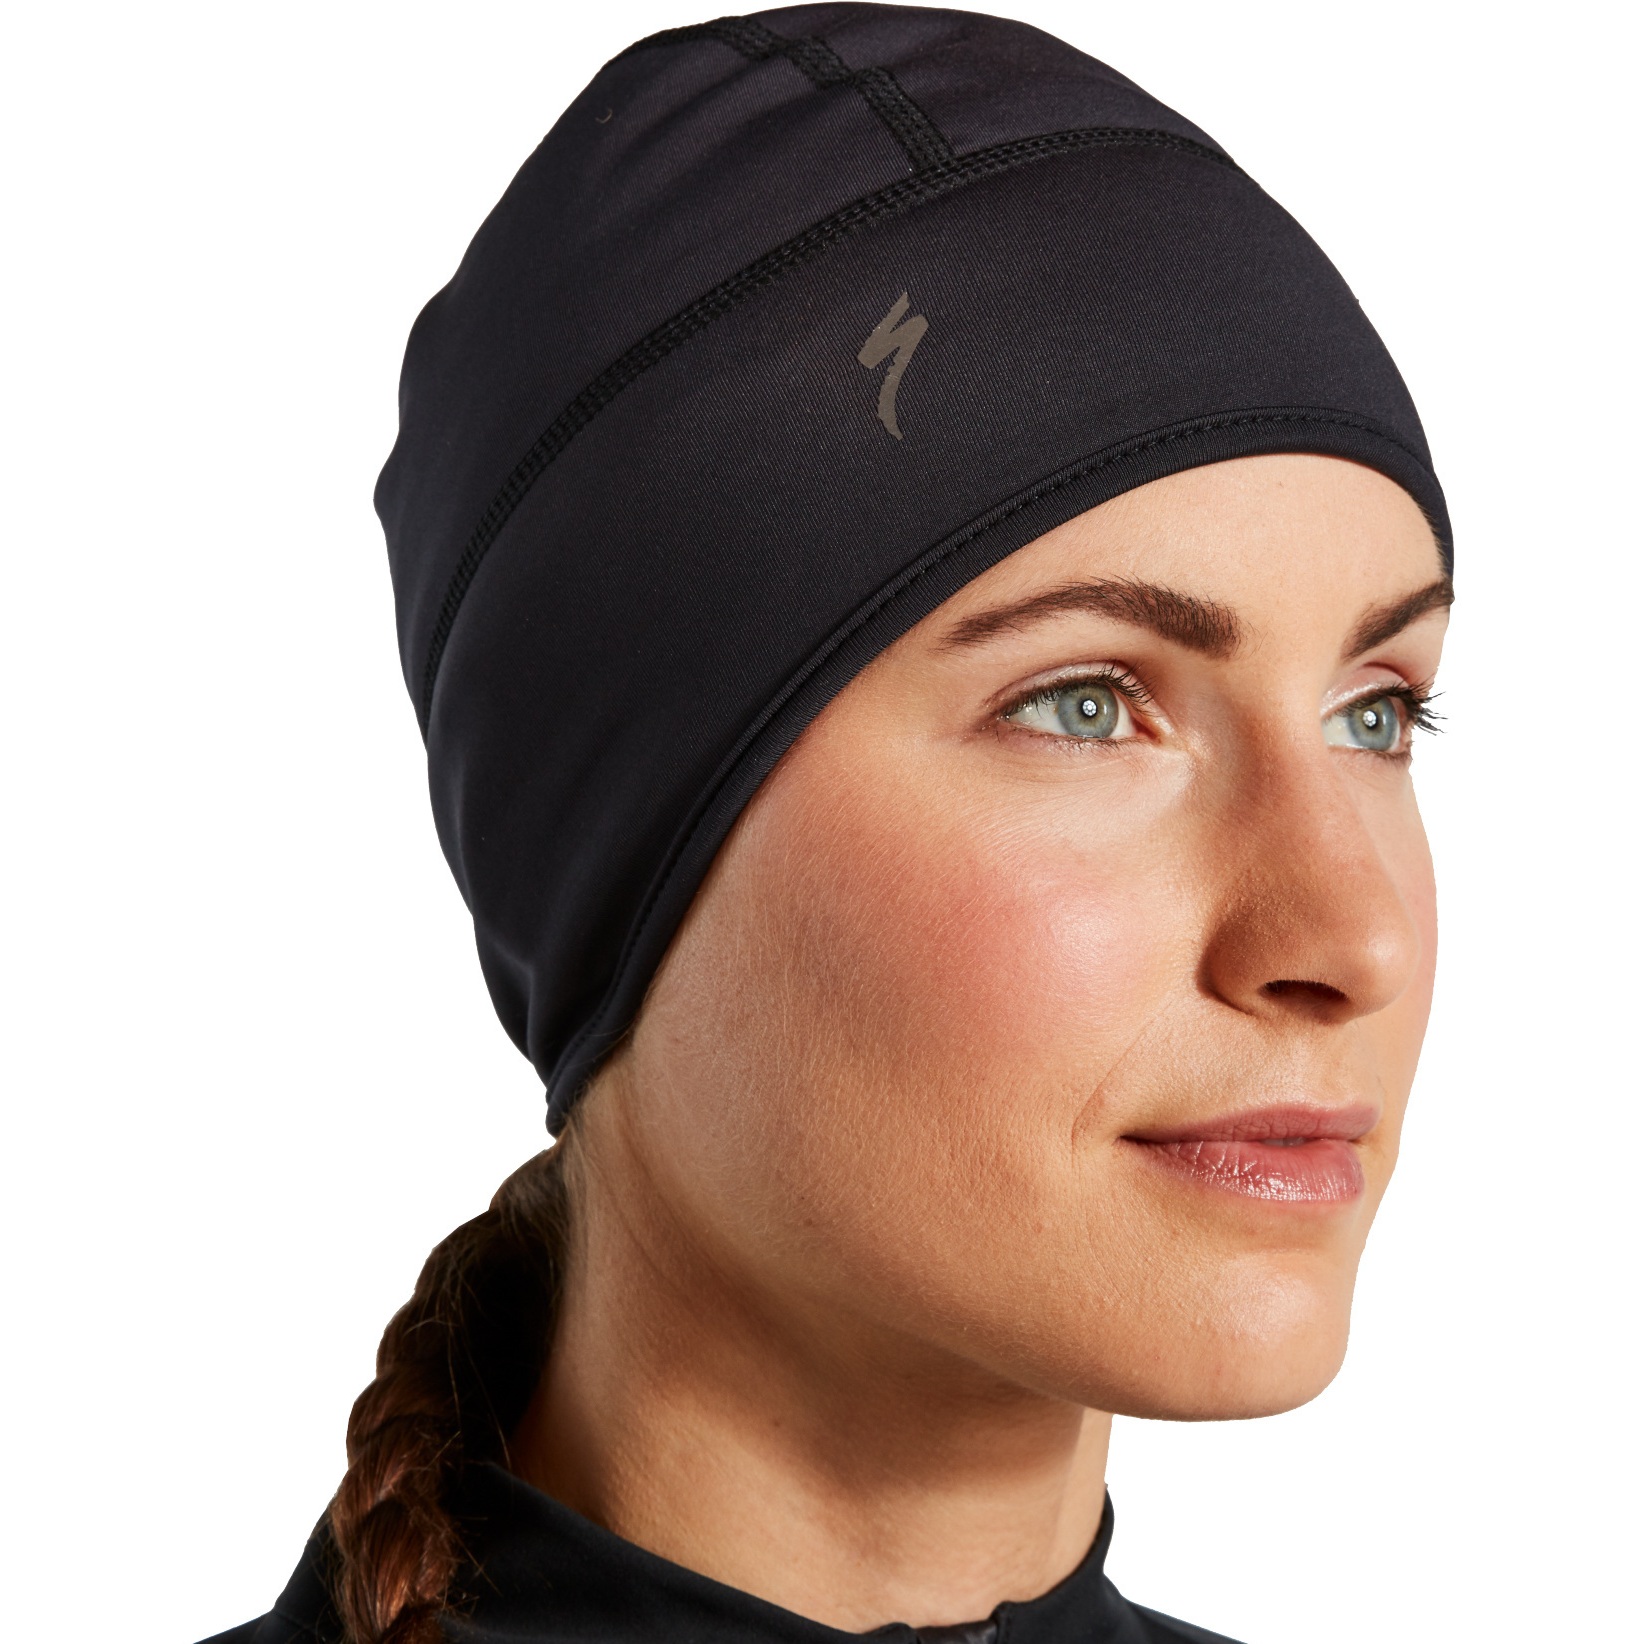 Productfoto van Specialized Thermal Beanie - black